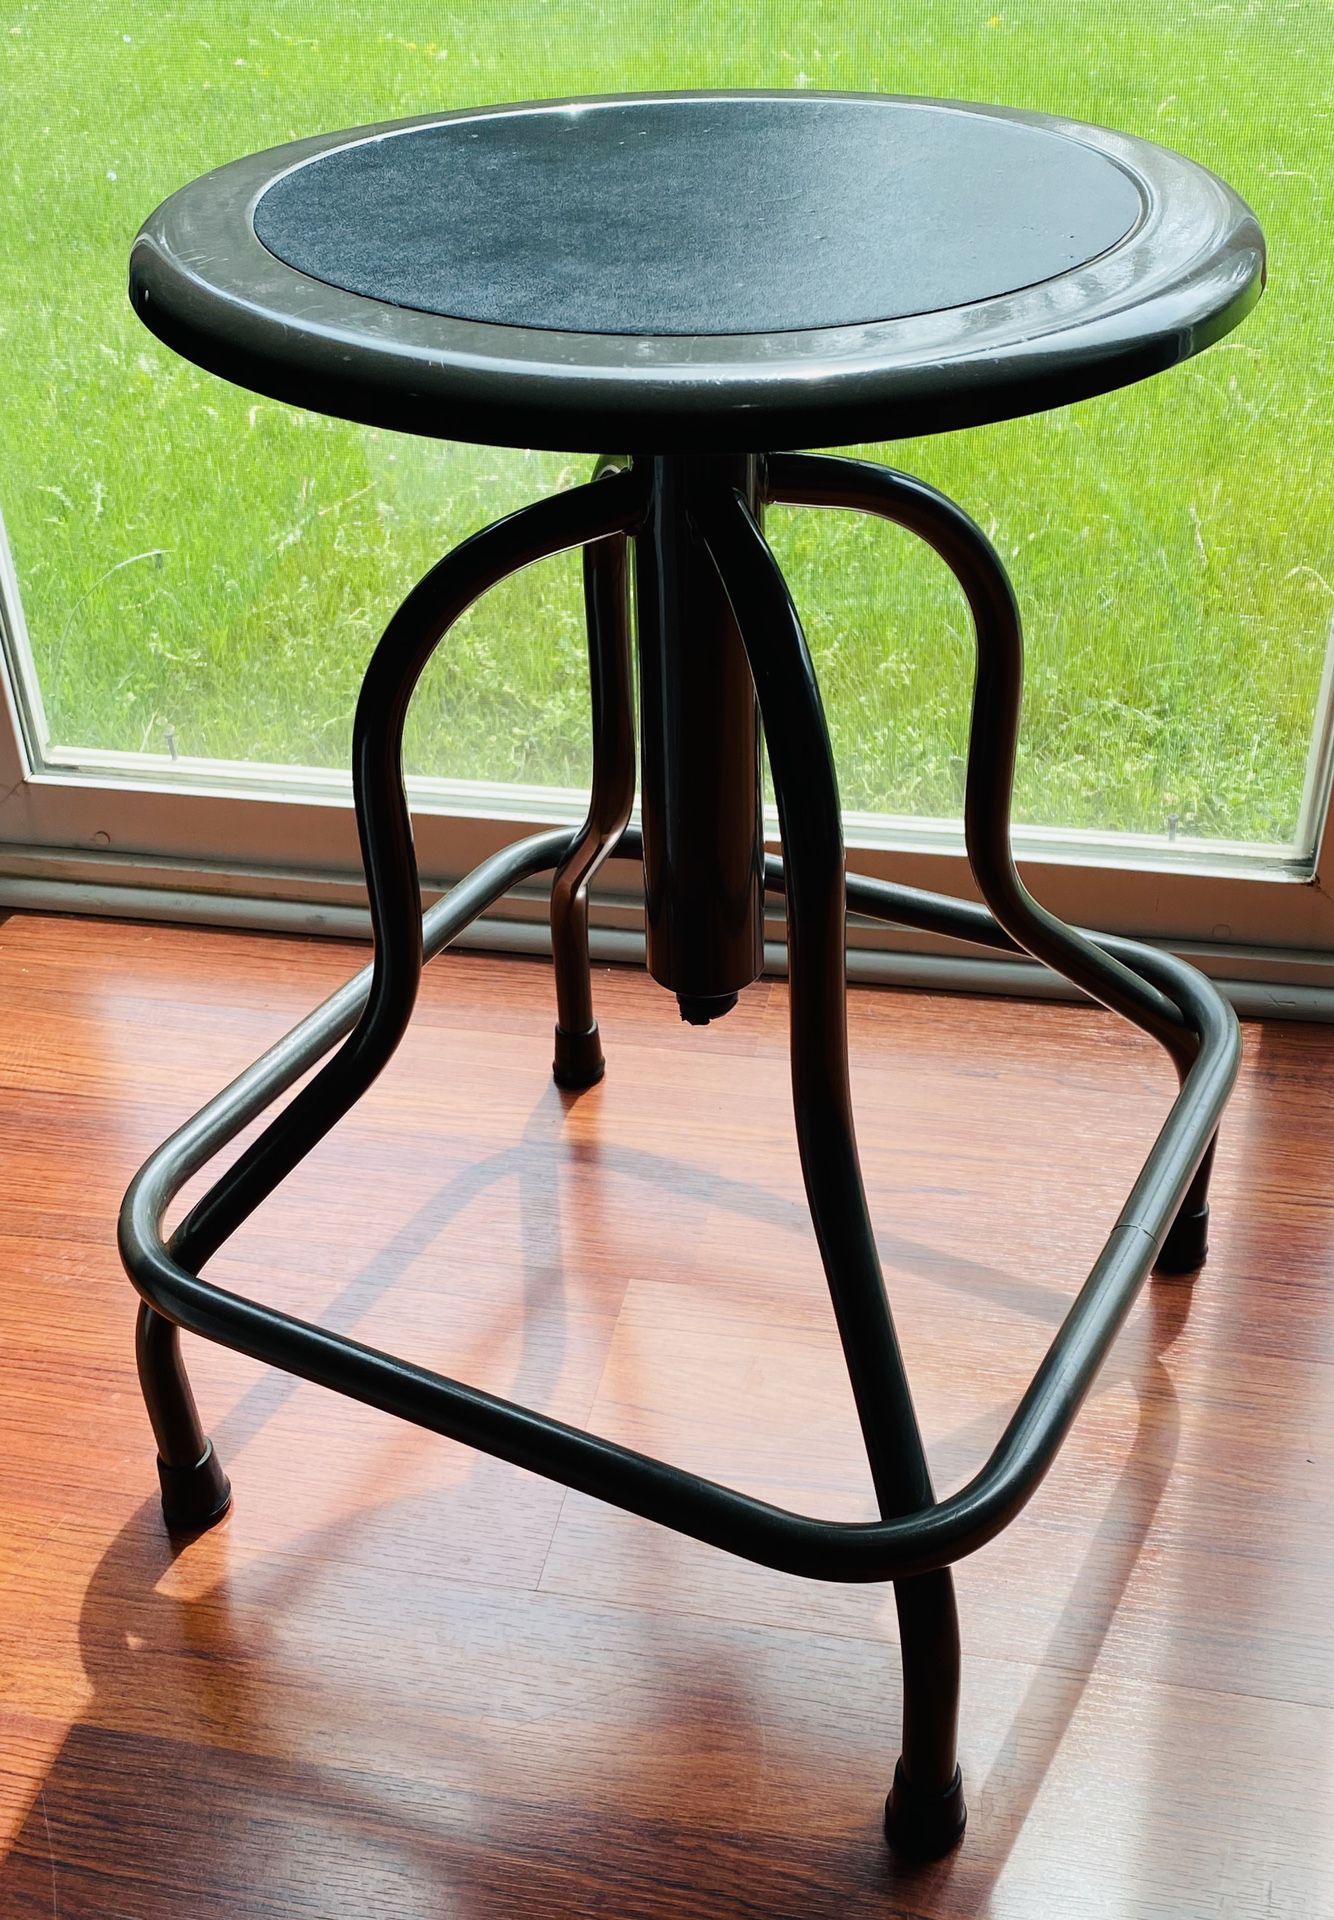 Rotating steel stool. Perfect for your garage, basement, work space, school, laundry room, kitchen, bedroom, desk, and more!